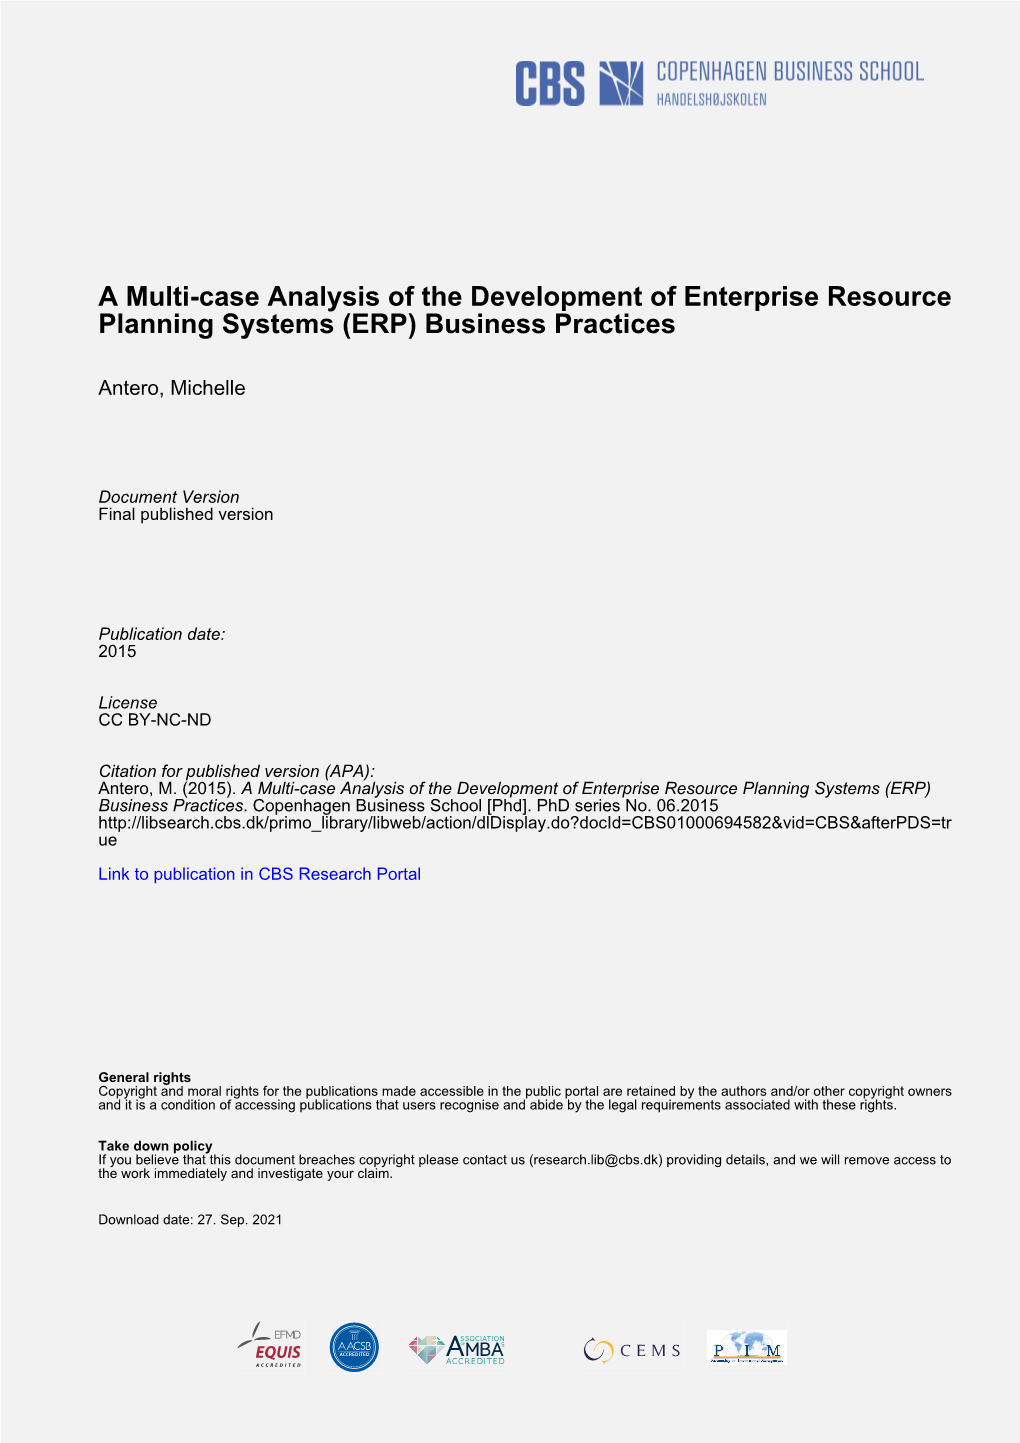 A Multi-Case Analysis of the Development of Enterprise Resource Planning Systems (ERP) Business Practices